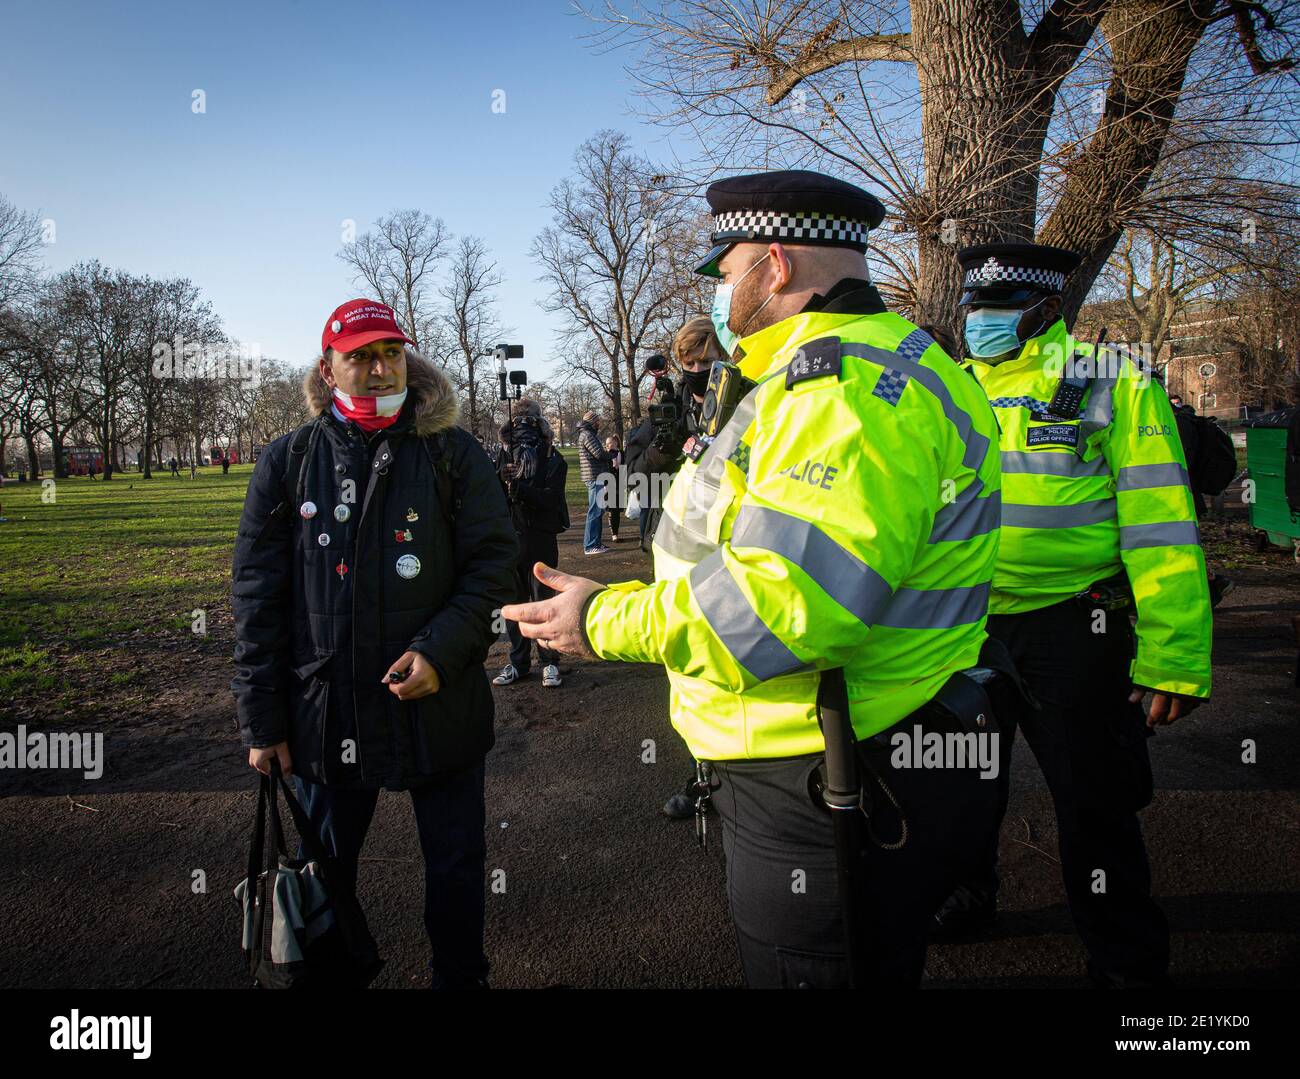 A protester wearing a 'Make Britain Great Again' baseball cap is questioned by Police on Clapham Common park during the anti-lockdown demonstration. Stock Photo